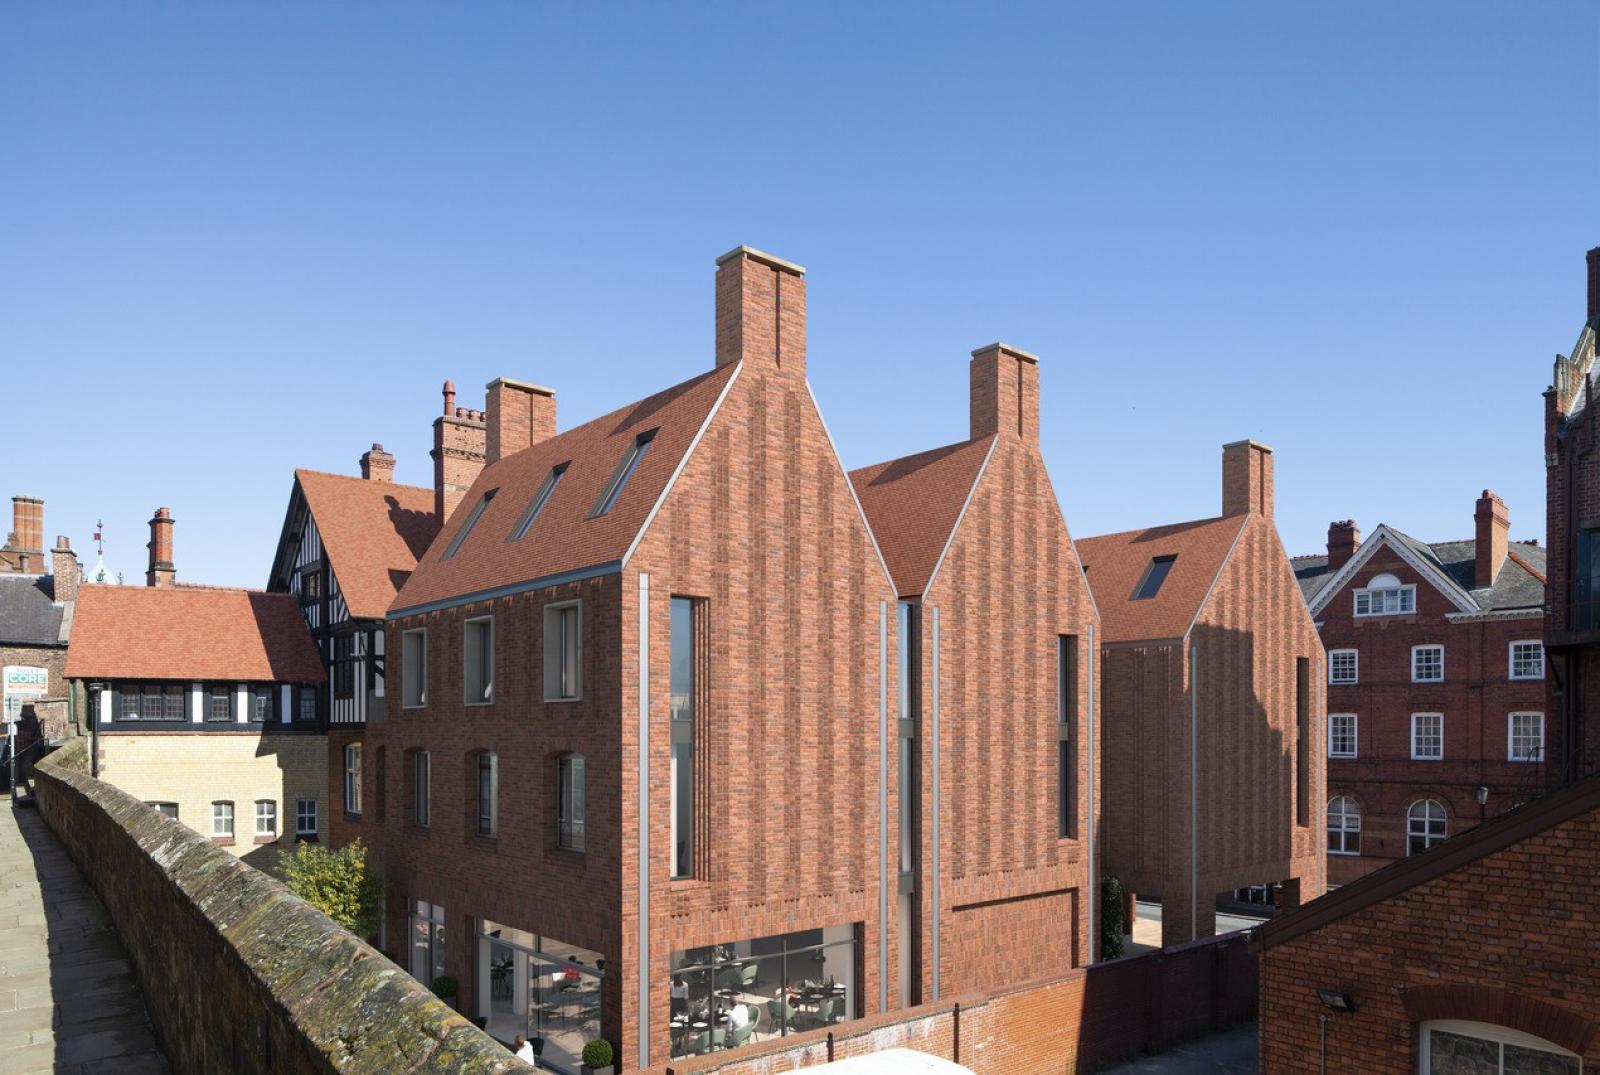 external image of a red brick hotel extension.  The bricks have vertical bands which make the design striking and these lead up to its tall chimneys. The ground floor has a glazed cafe area with the first and second floors featuring six windows.  The attic roof features three windows.  